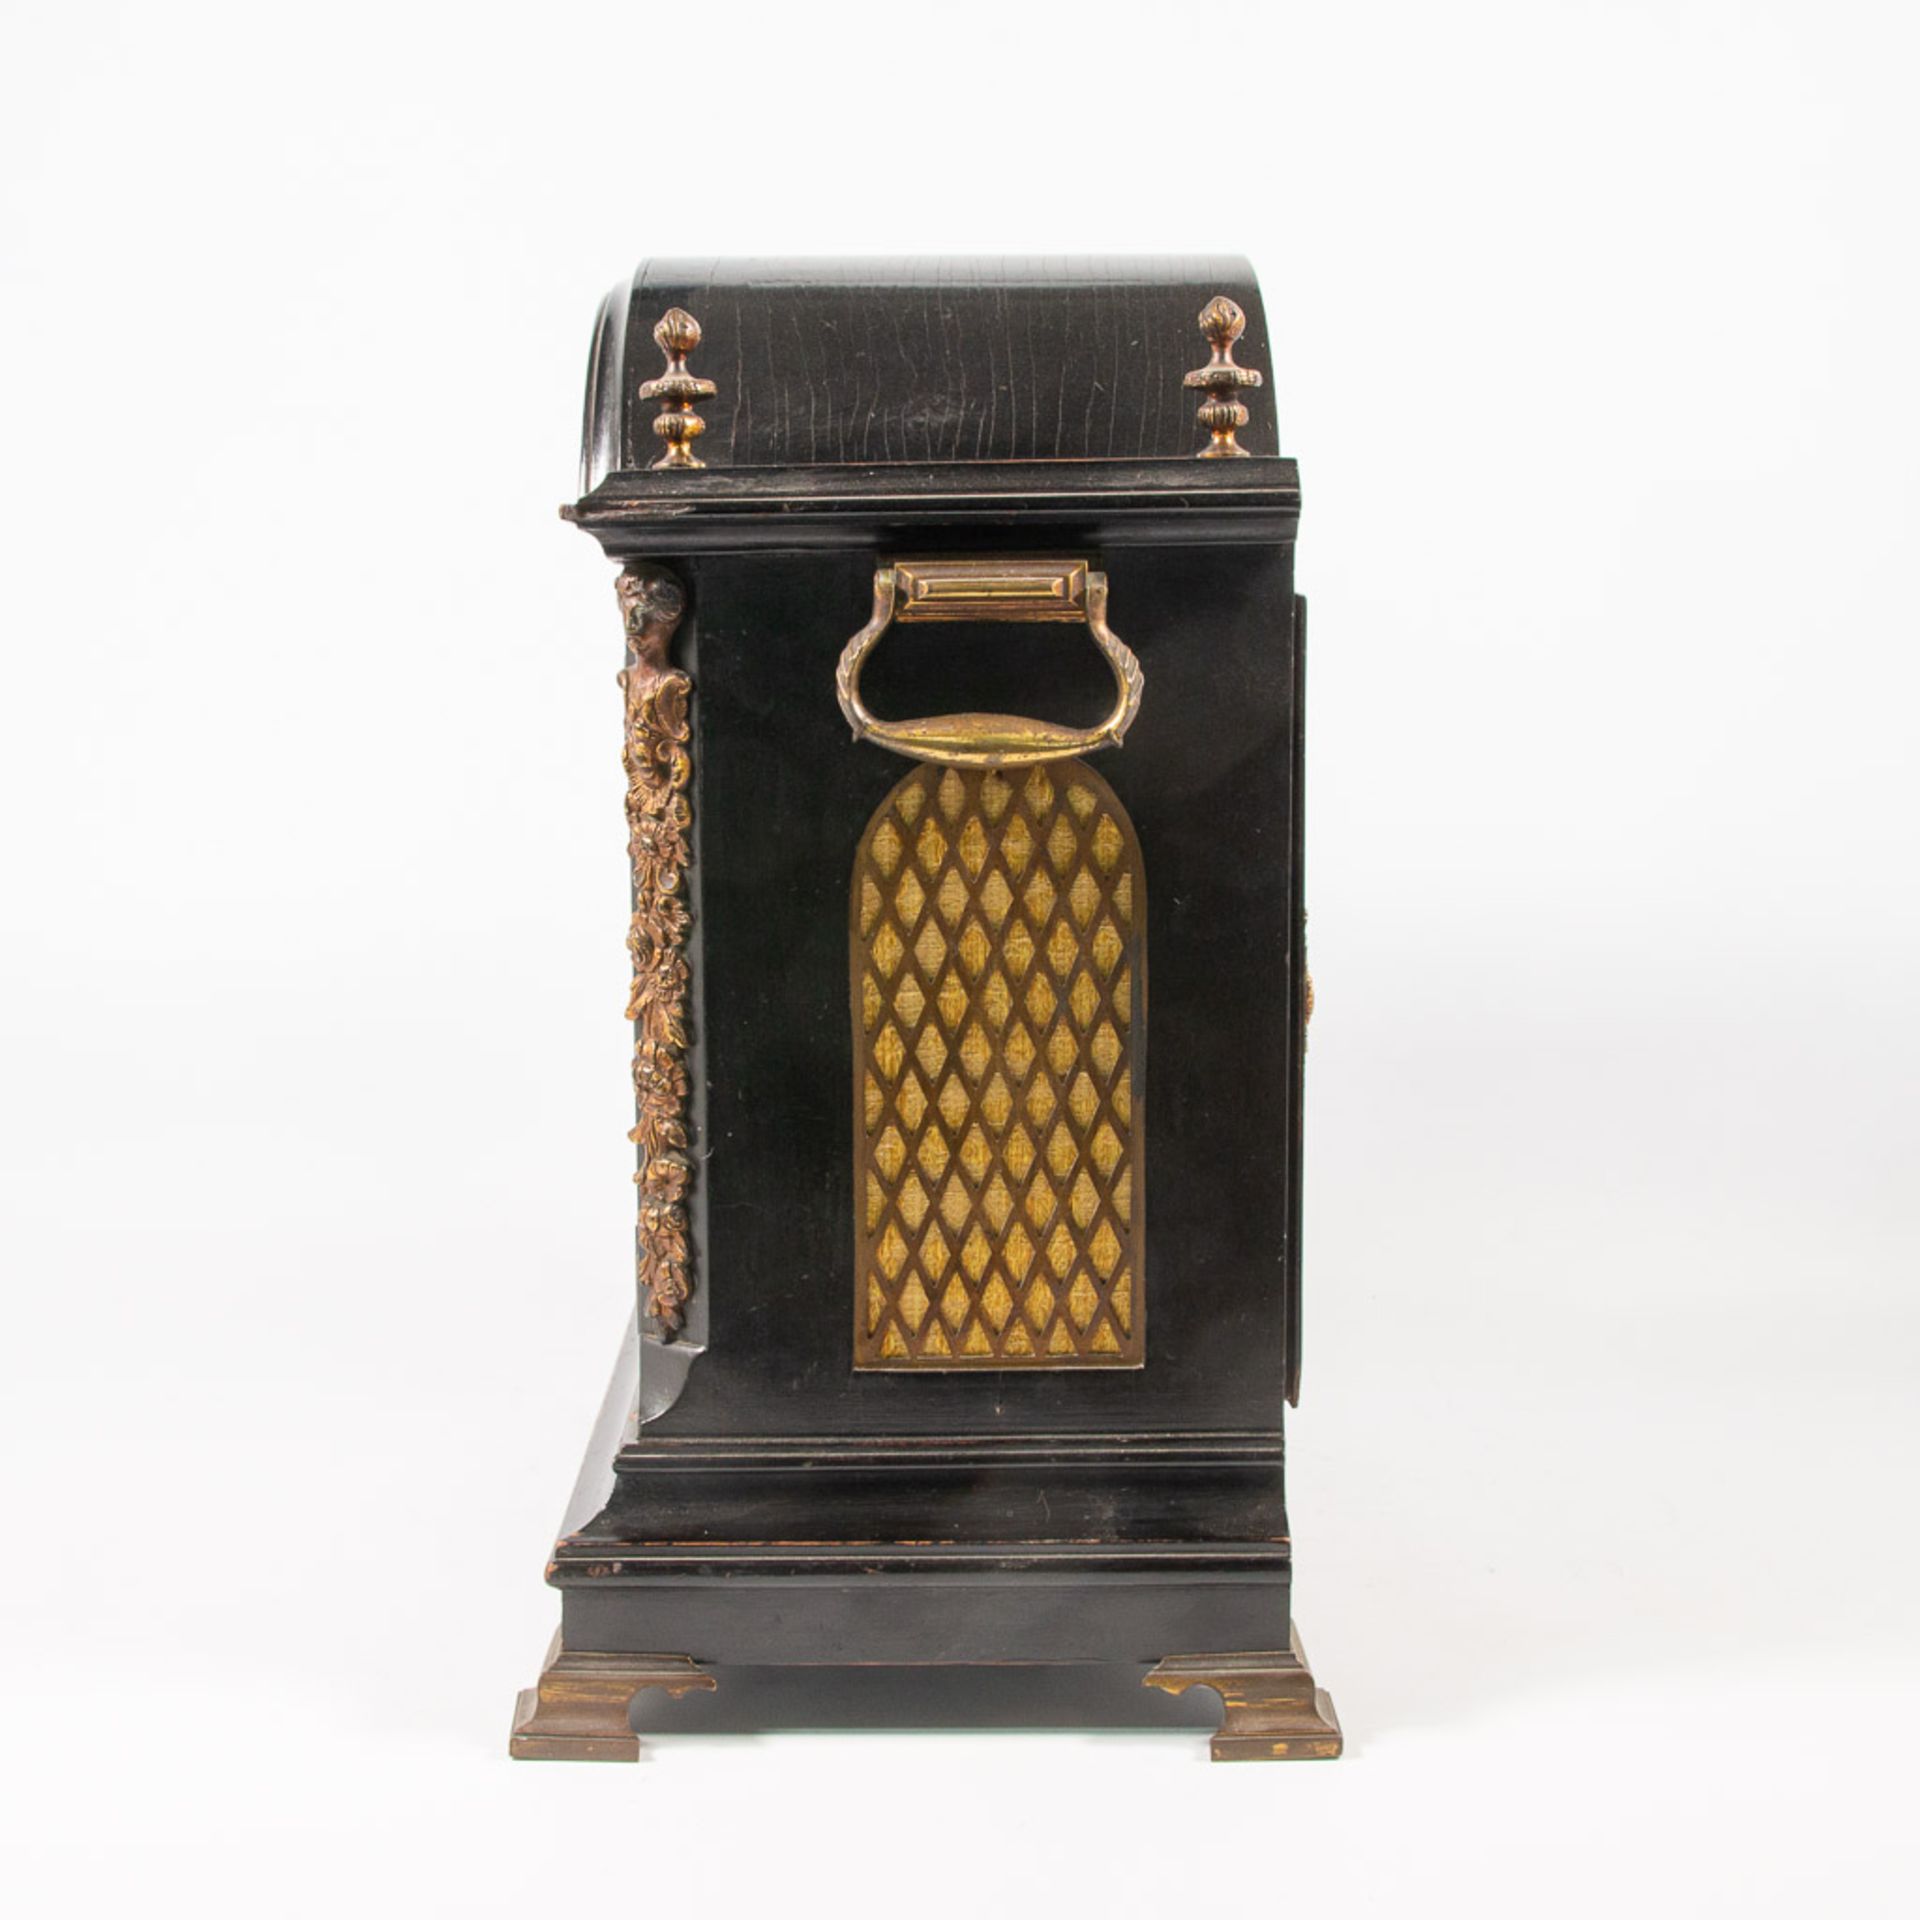 A tableclock with musical movement, 8 bells - Image 3 of 19